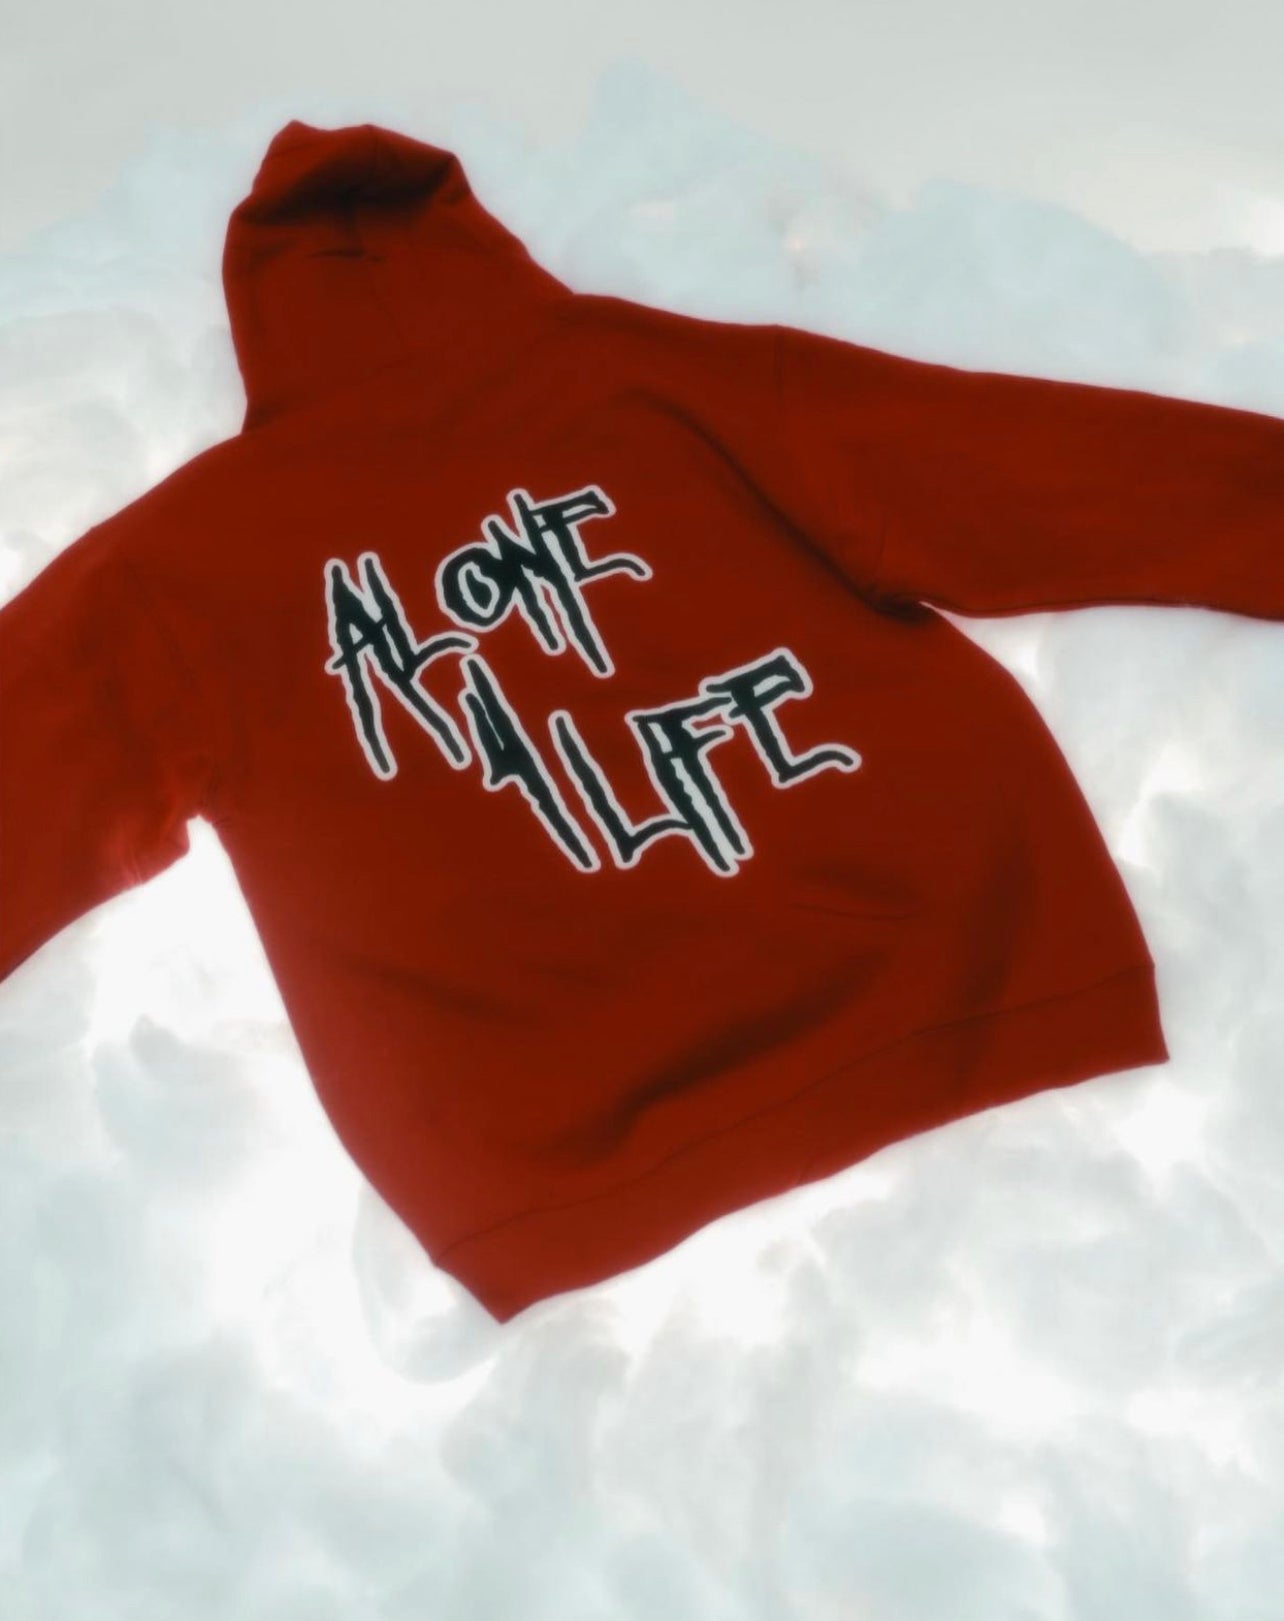 Half Happy Alone 4 Life Hoodie Red